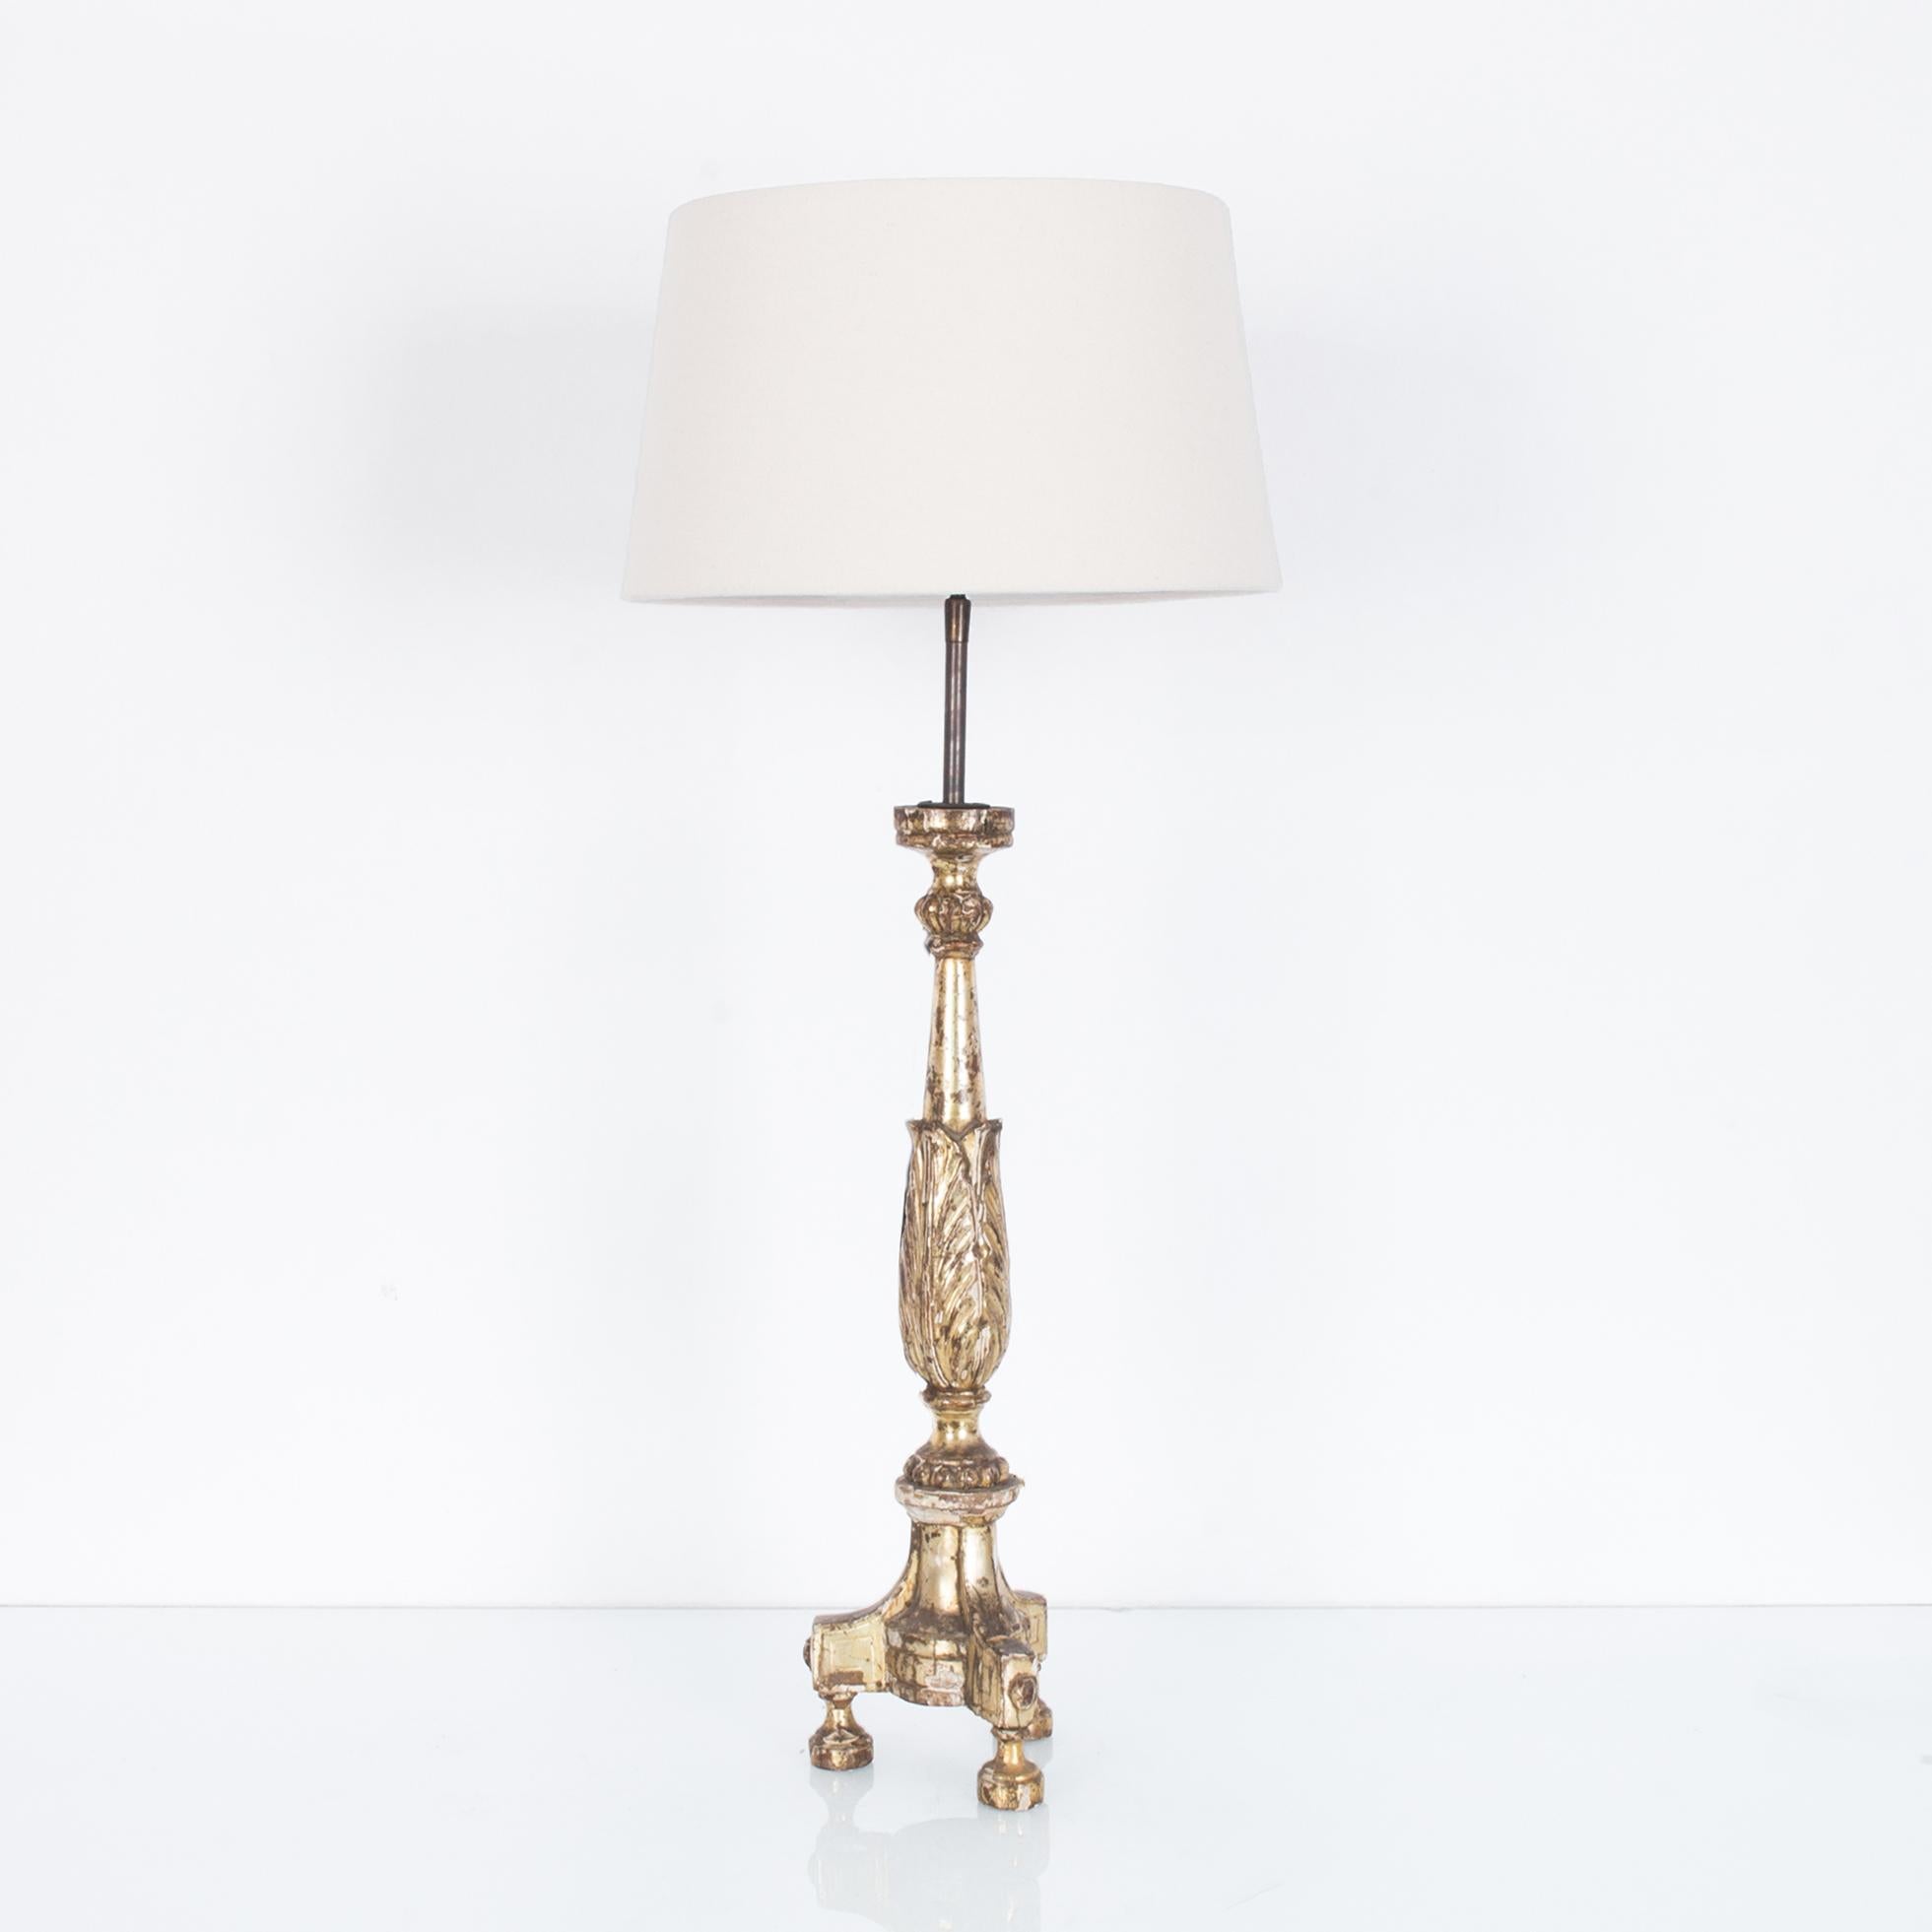 A gilded wooden table lamp from France, circa 1800. A repurposed rococo candlestick supports an empire lampshade in natural white. Three pedestal feet elevate a slender column embellished with an arrangement of carved leaves. The bright gilded